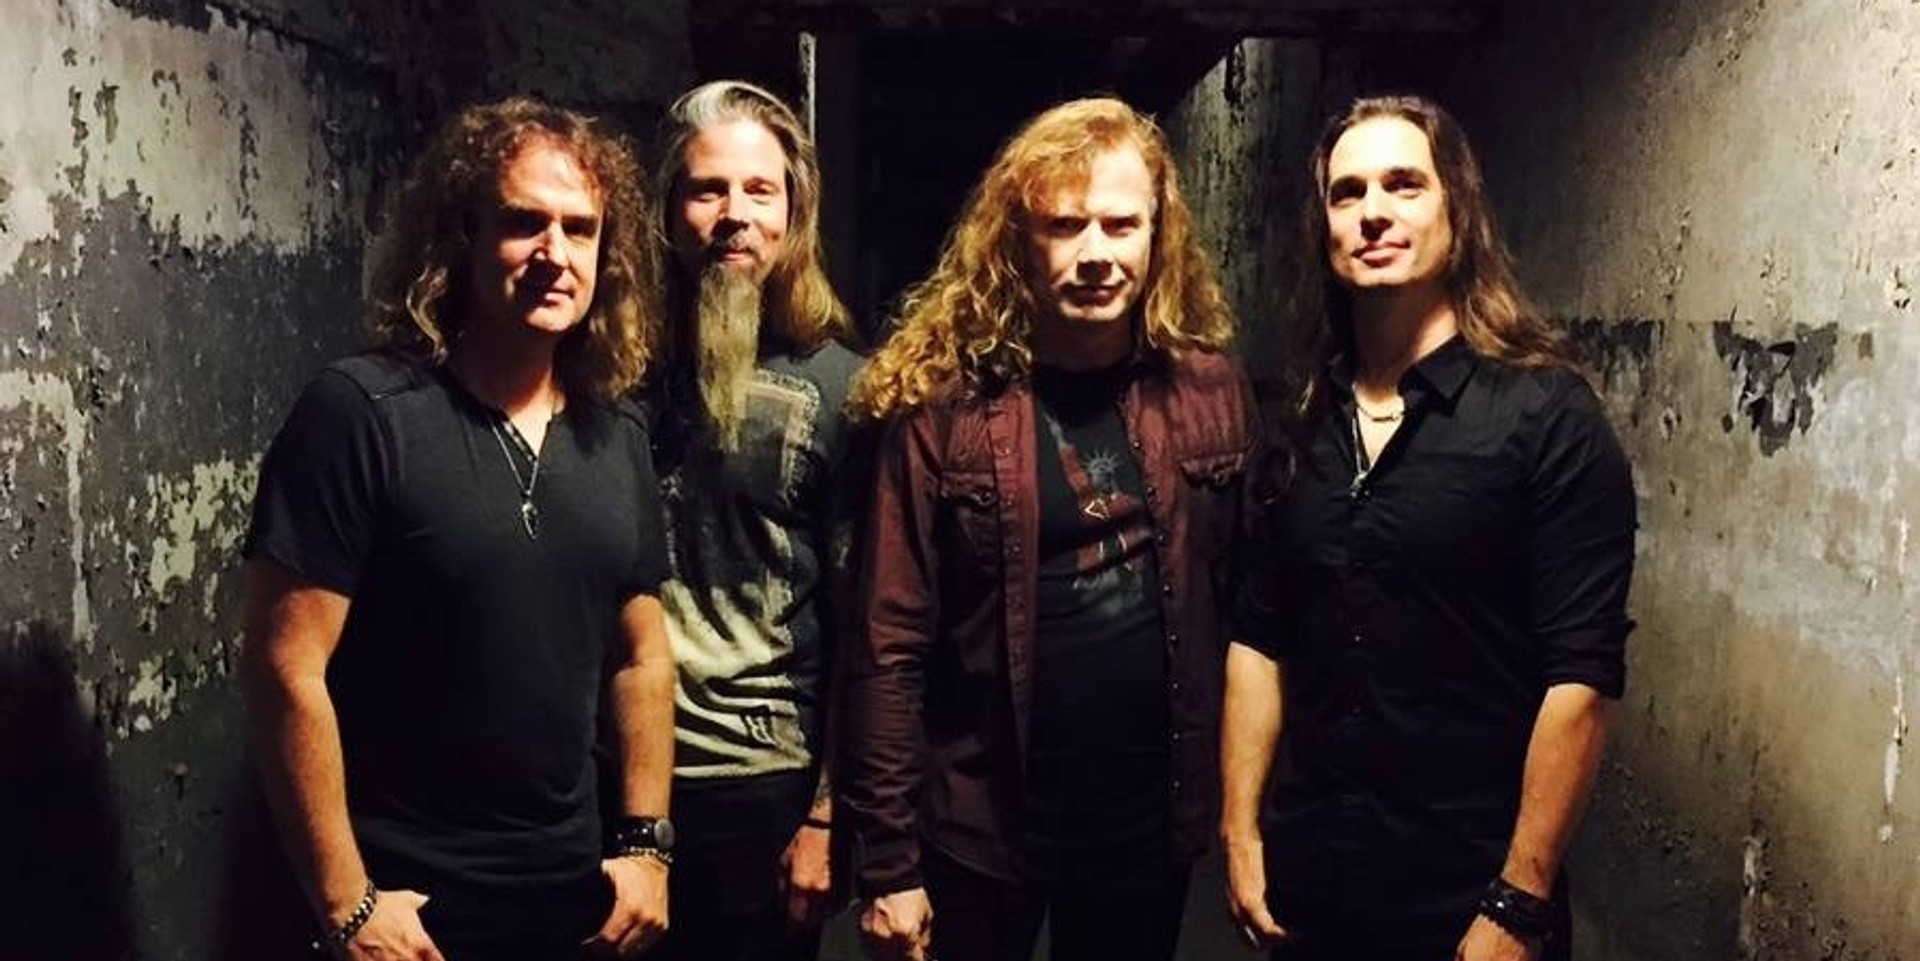 Megadeth, The Black Dahlia Murder, Whitechapel and more set to play Hammersonic Festival